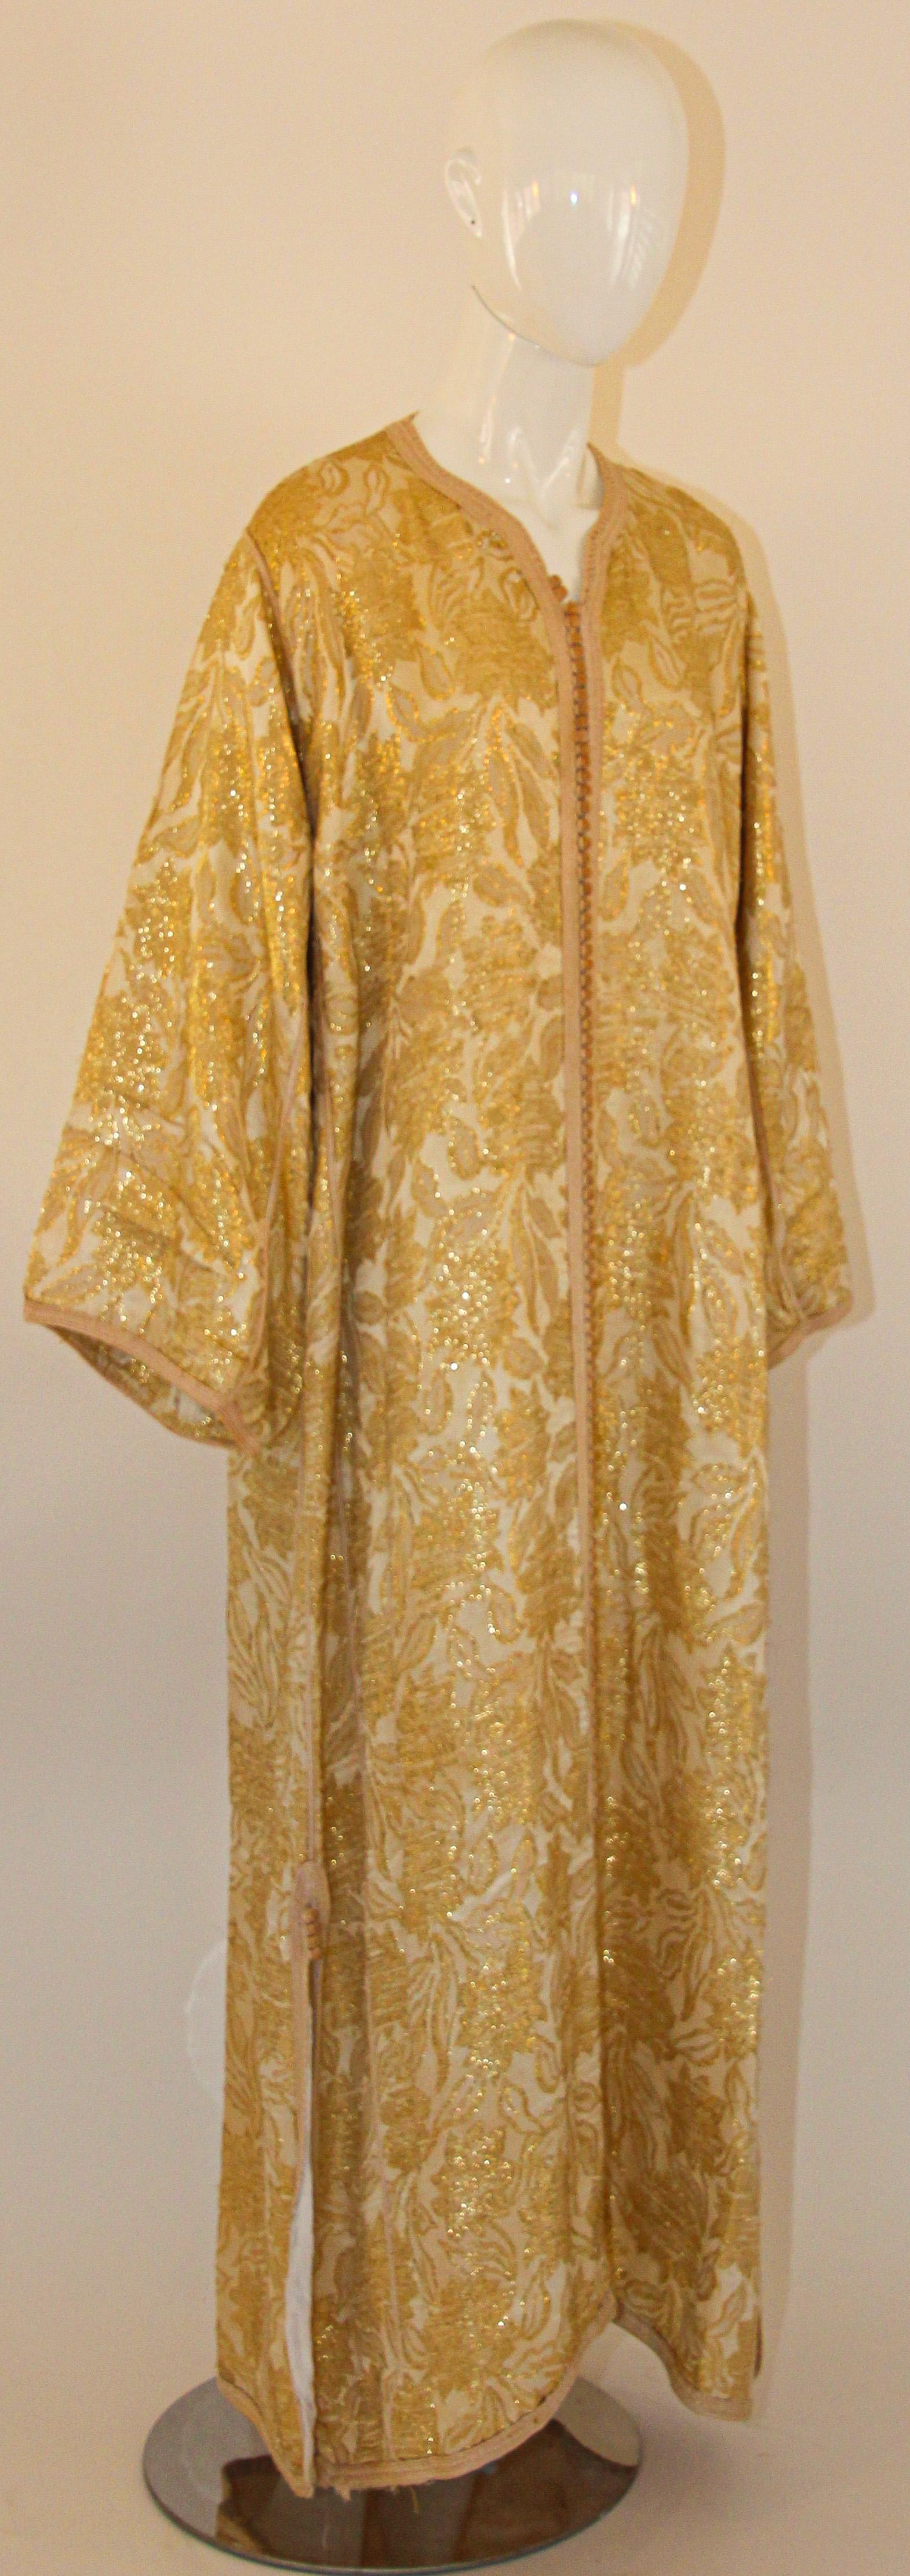 Amazing antique Moroccan Caftan, gold silk damask with a gold threads trim, Circa 1940's
The gold damask kaftan was entirely finish by hand.
One of a kind evening antique Moorish gown.
This authentic caftan has been hand-sewn from high end damask